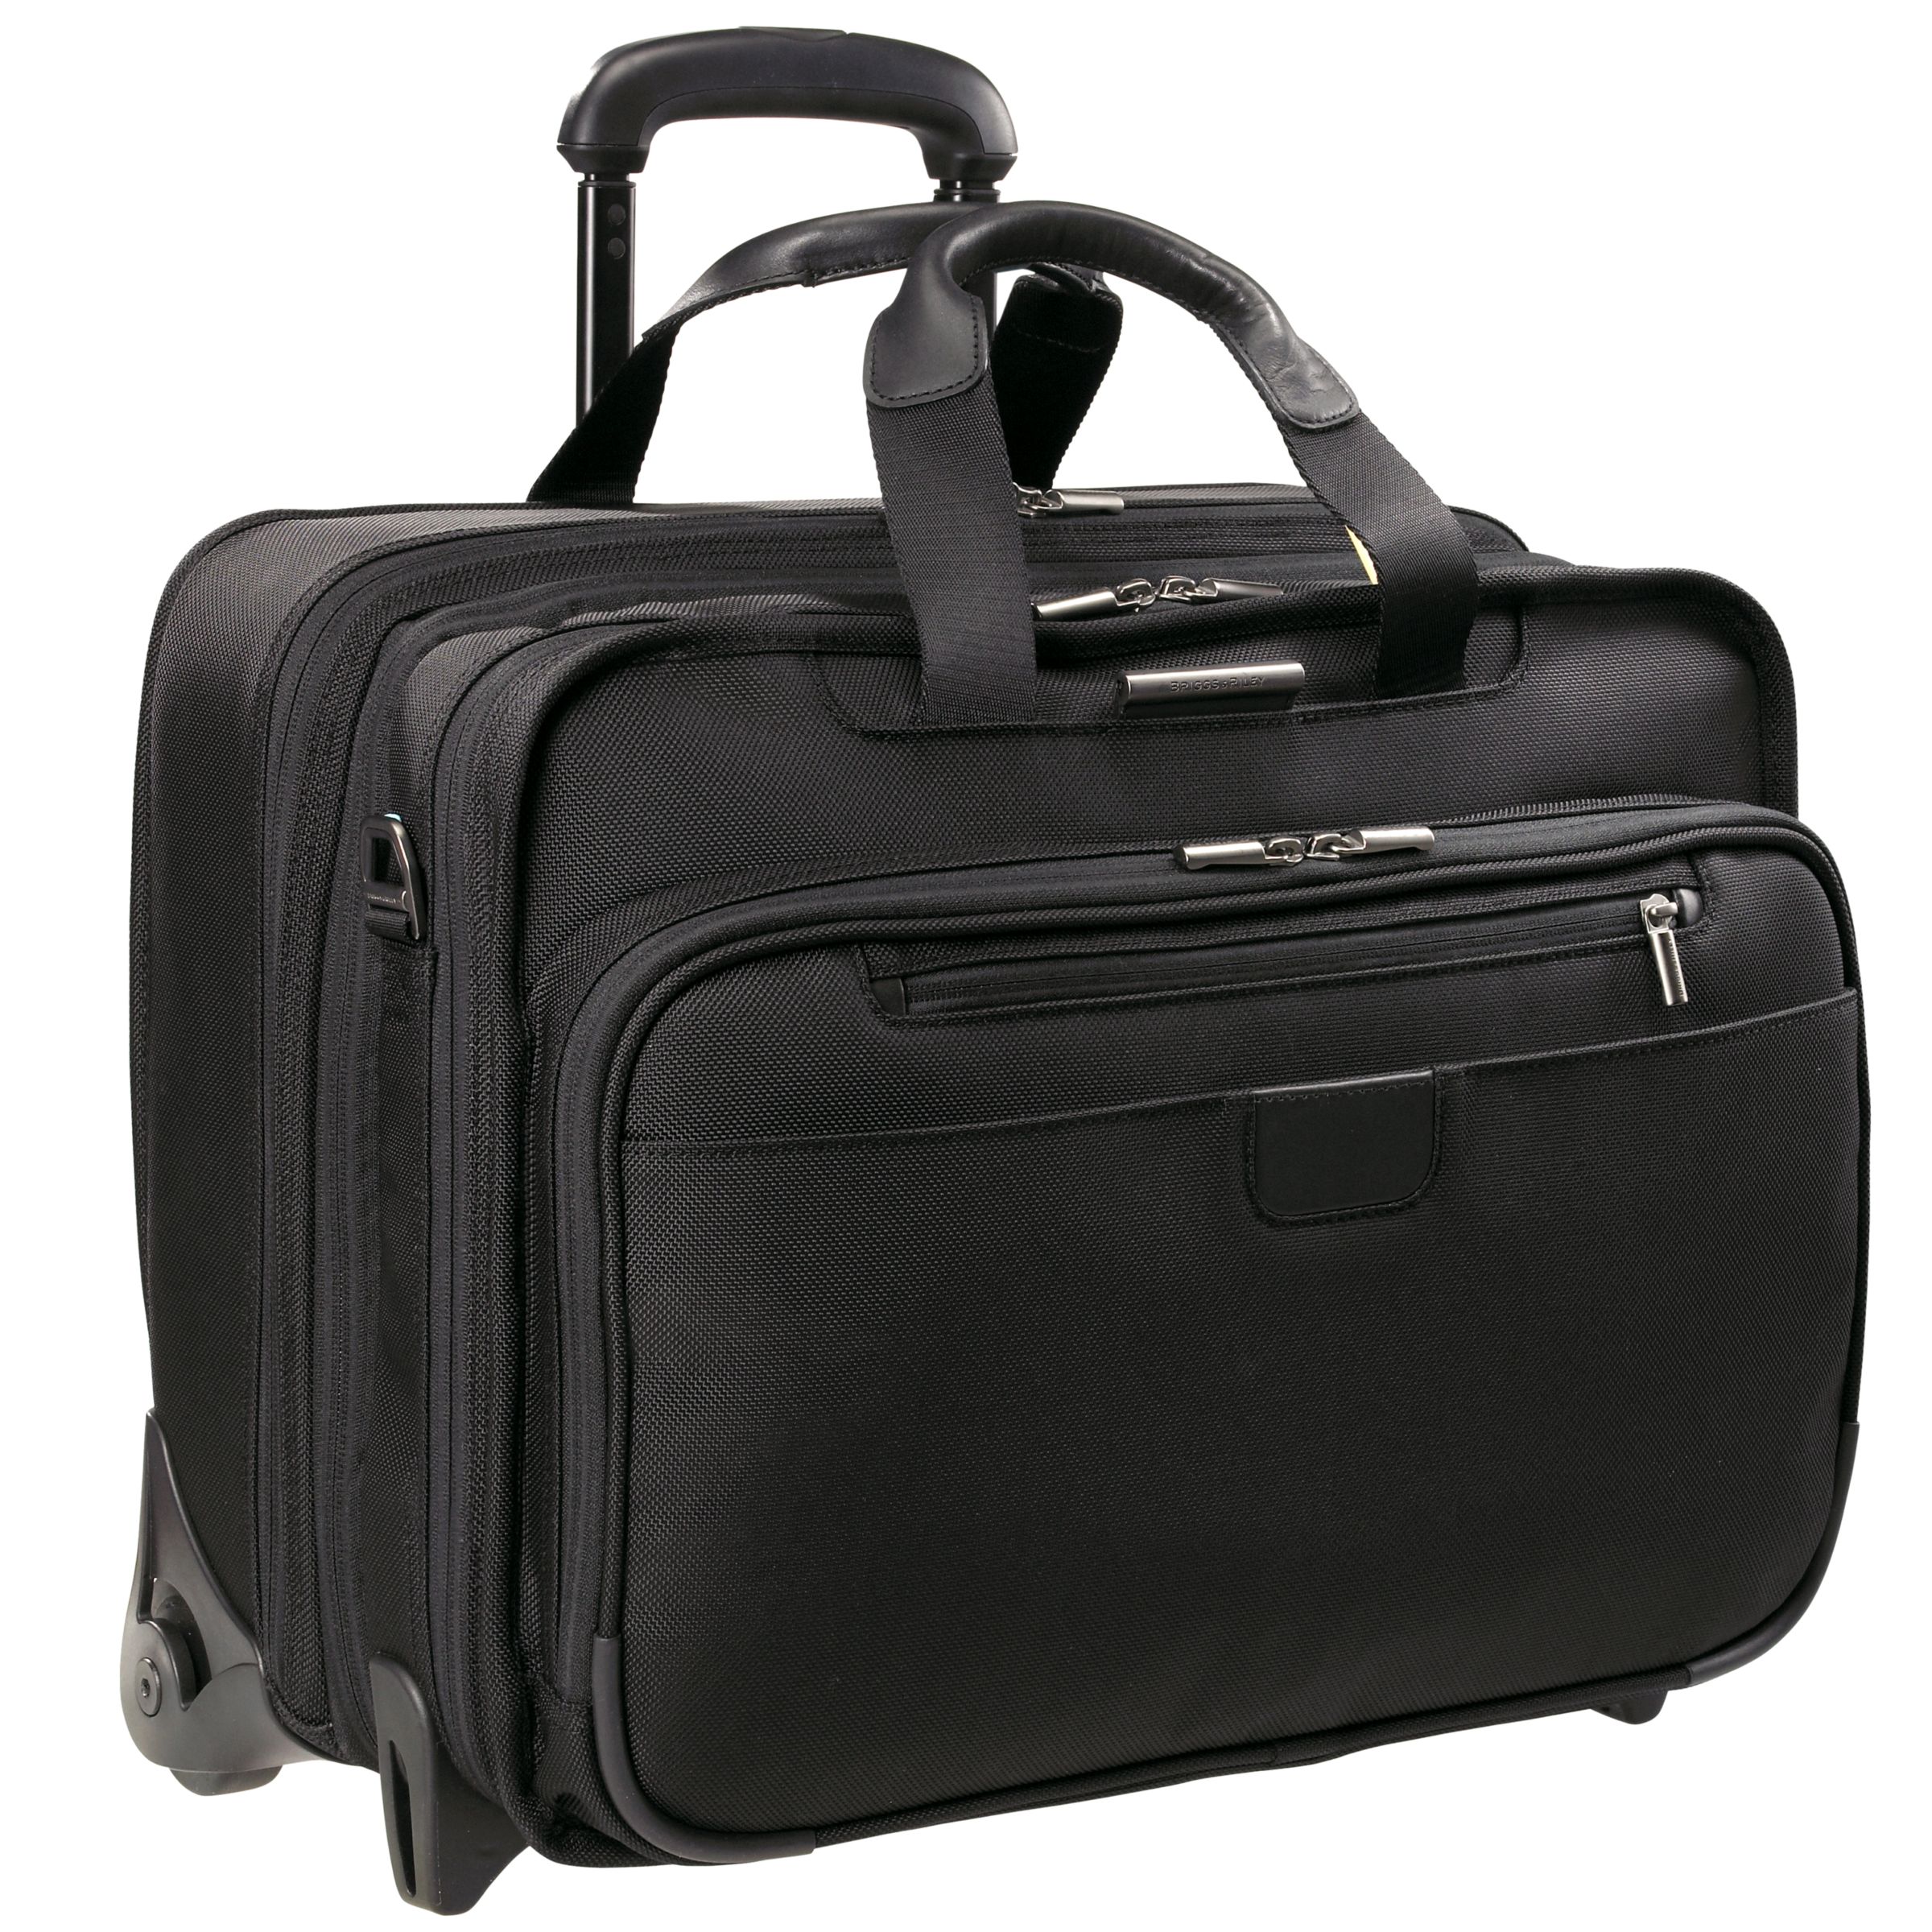 Briggs & Riley 17" Executive Expandable Rolling Briefcase, Black at John Lewis